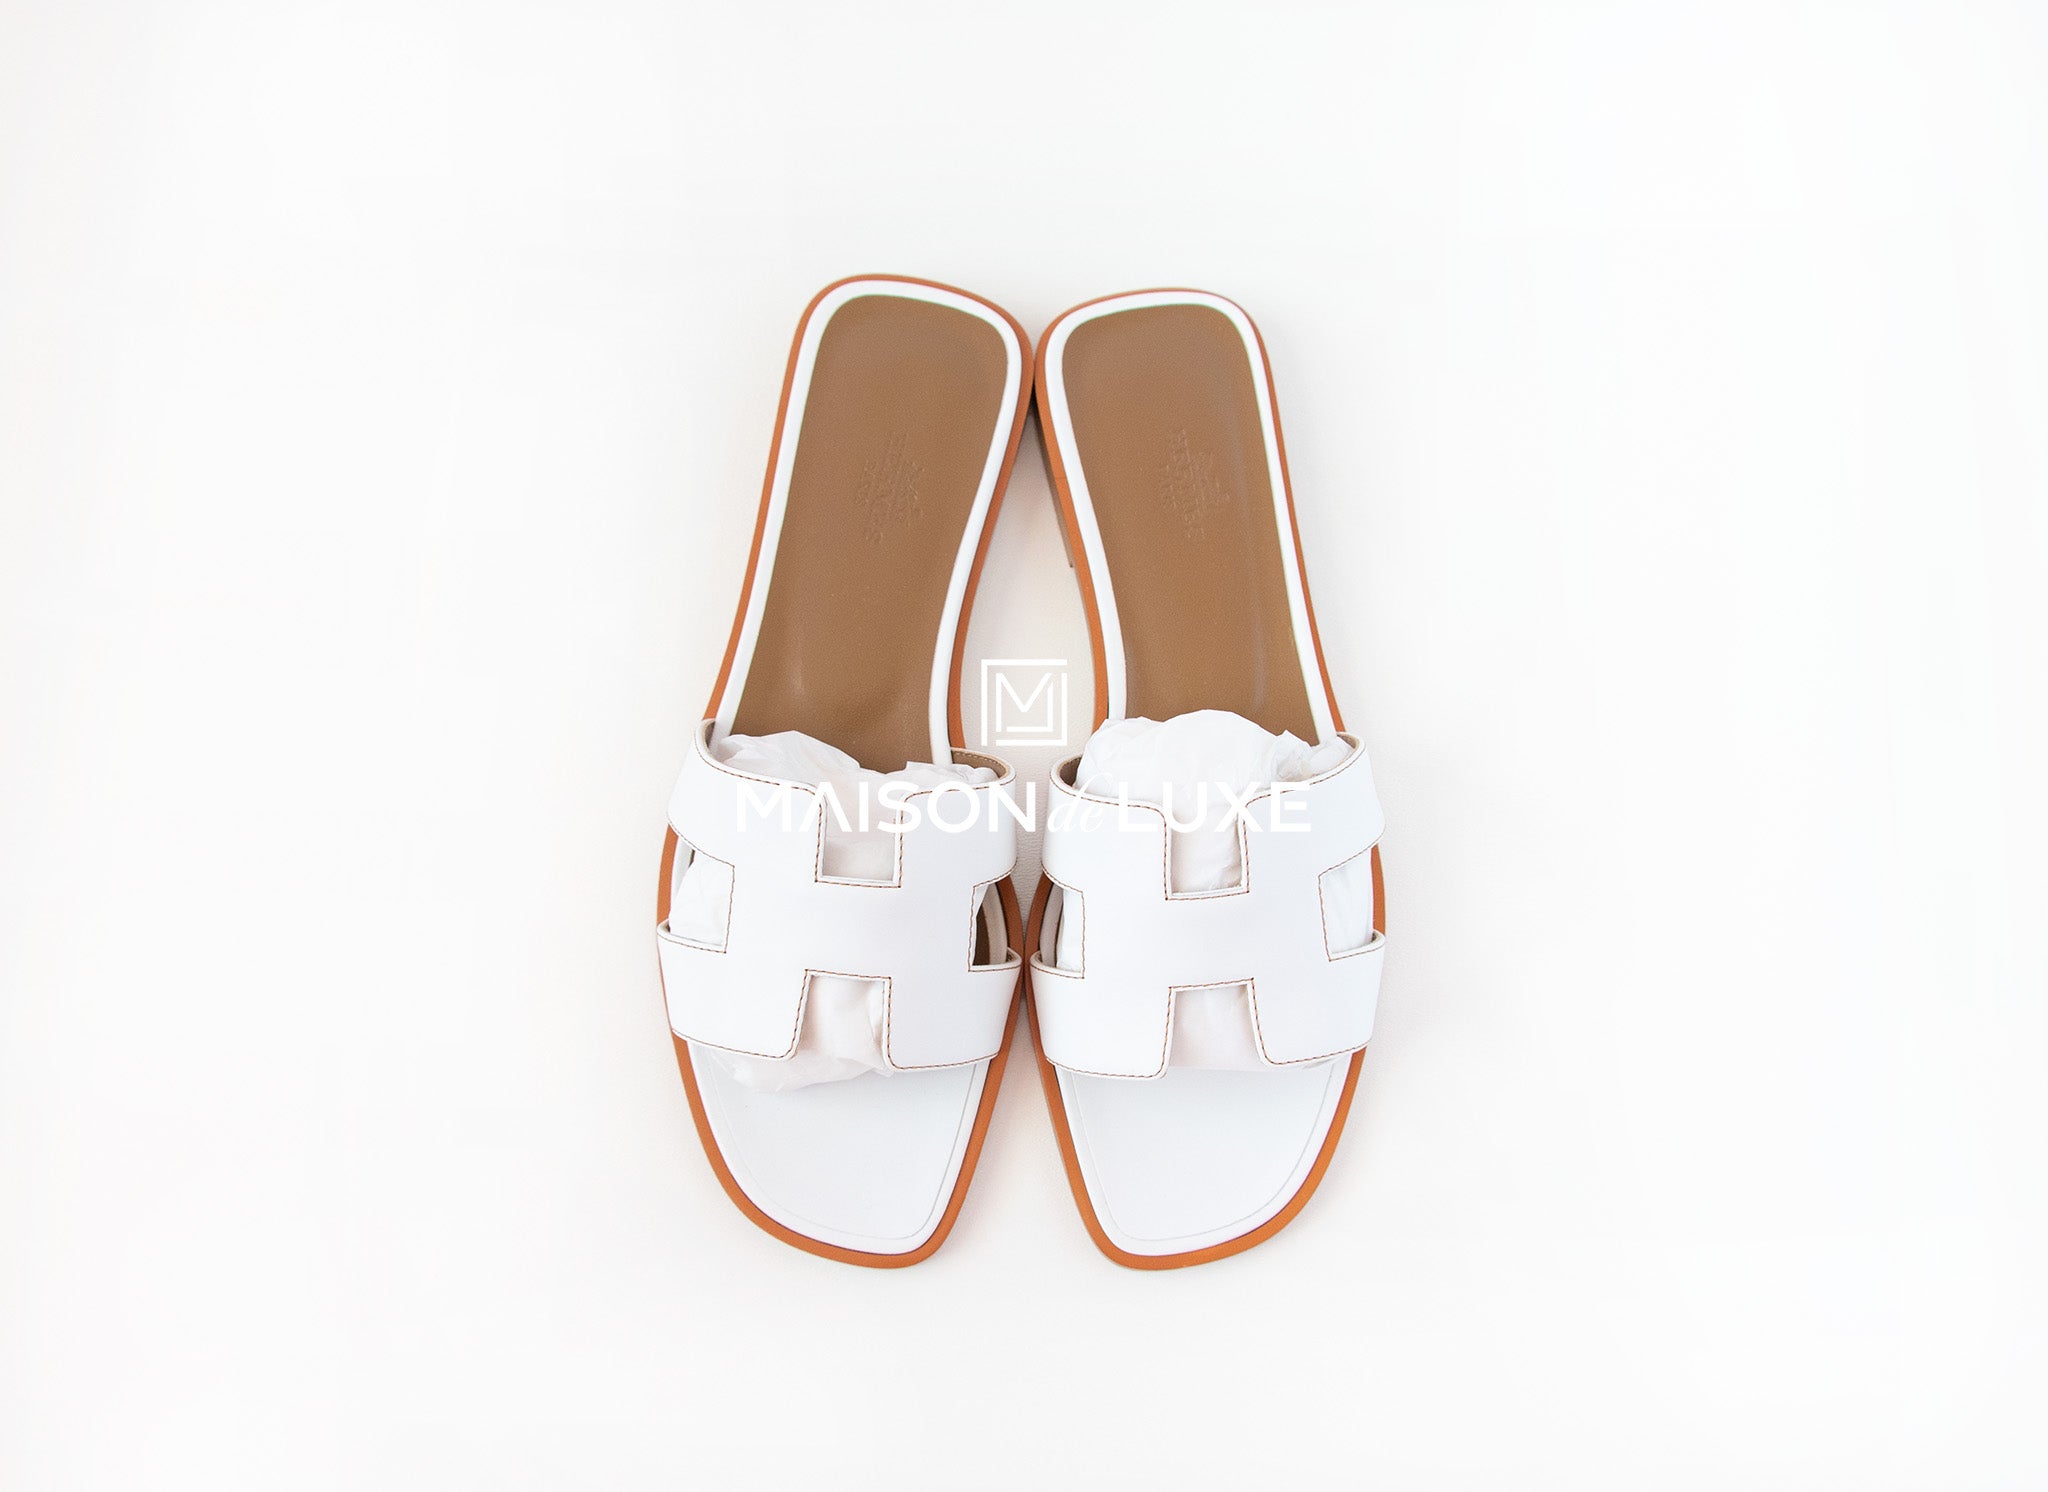 Hermes woman slippers Epsom leather flats white color